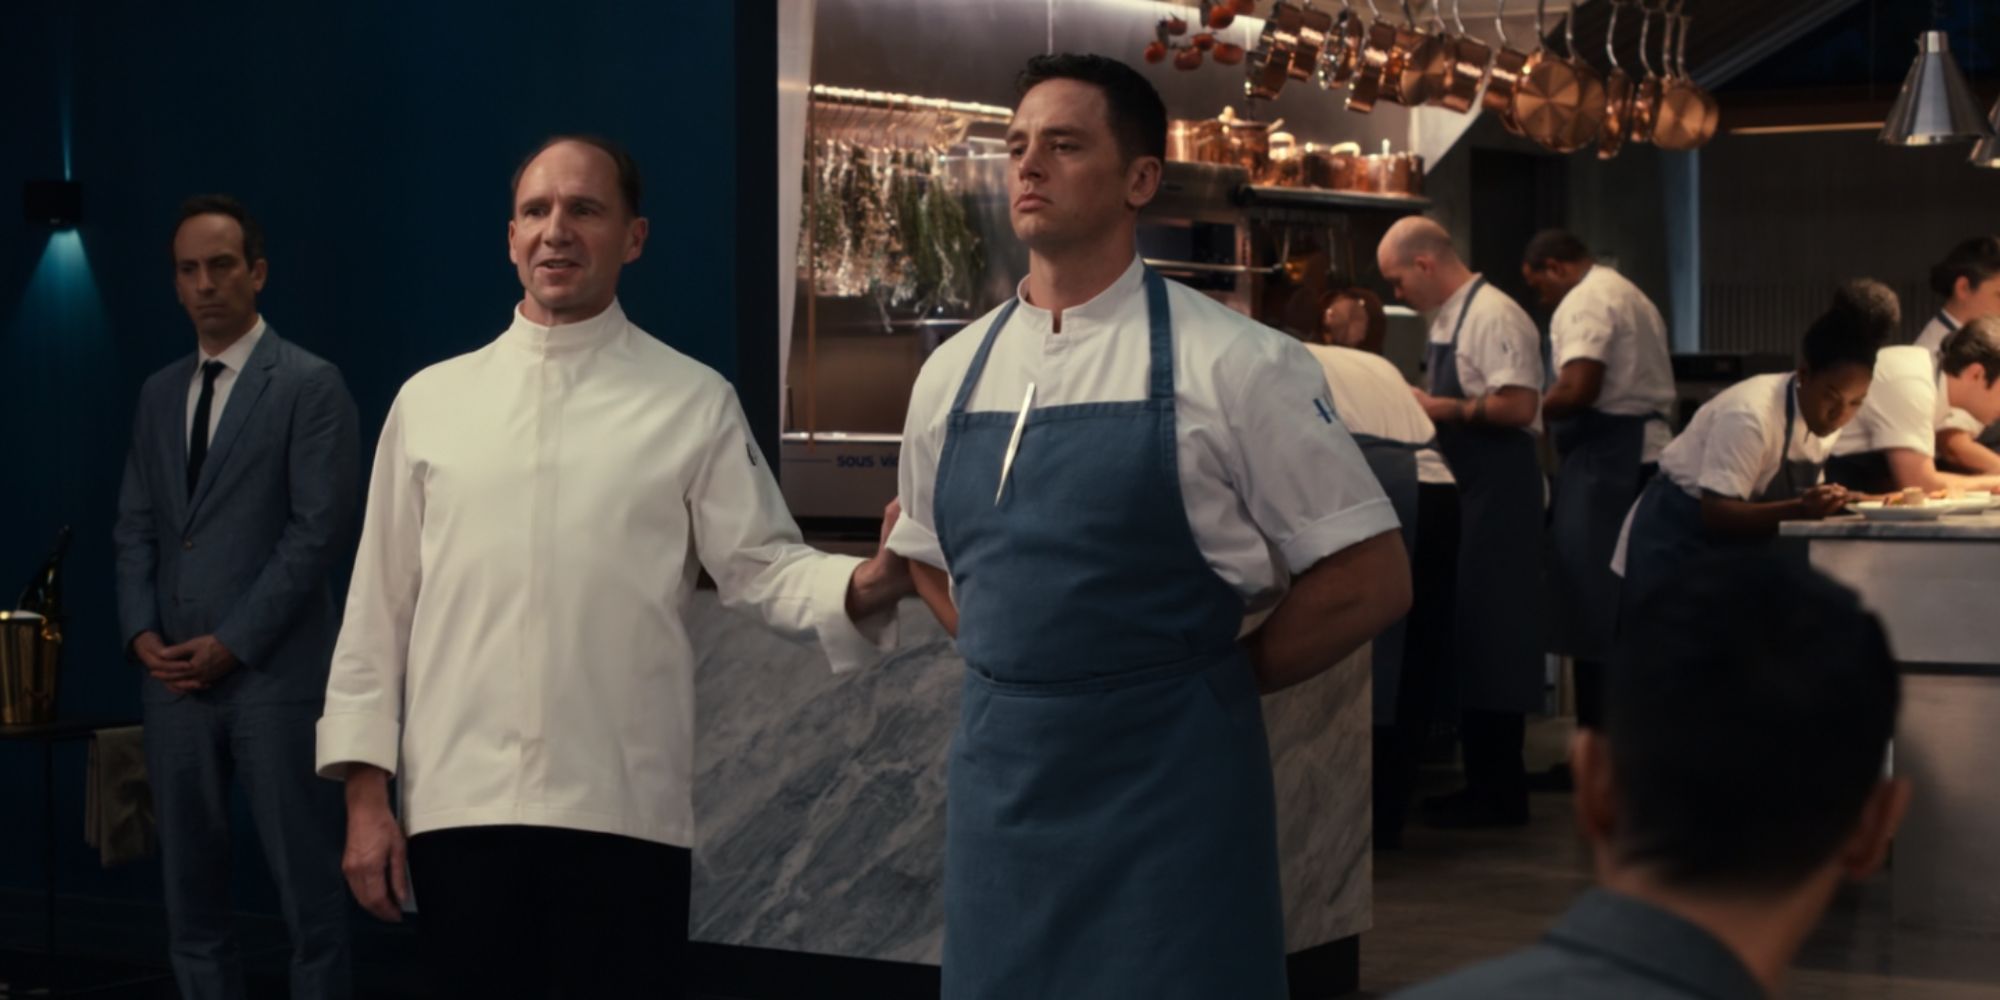 Julian (Ralph Fiennes) standing with a man in an apron in The Menu